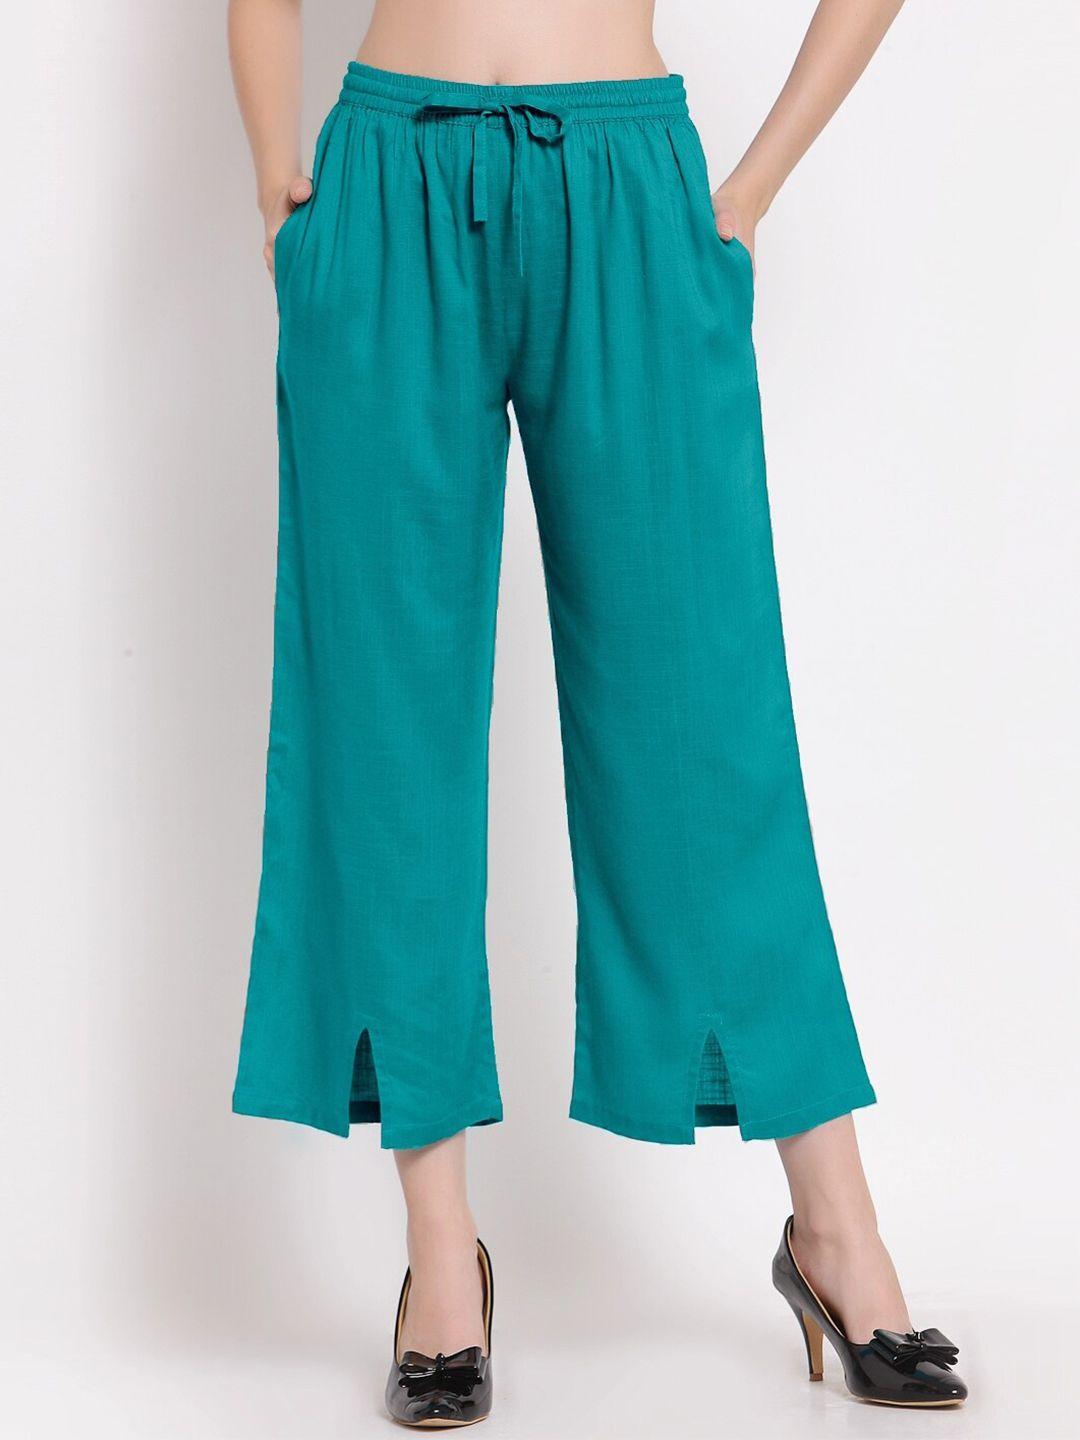 patrorna women sea green relaxed fit cotton capris